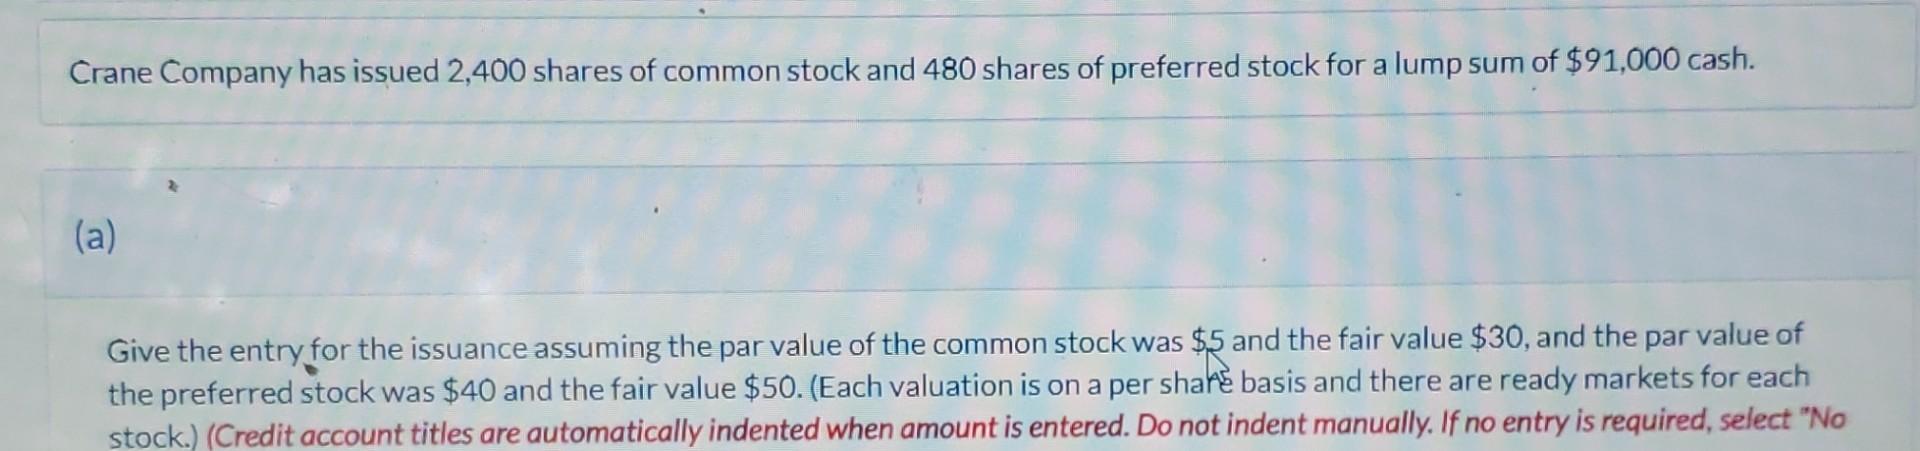 Crane Company has issued 2,400 shares of common stock and 480 shares of preferred stock for a lump sum of